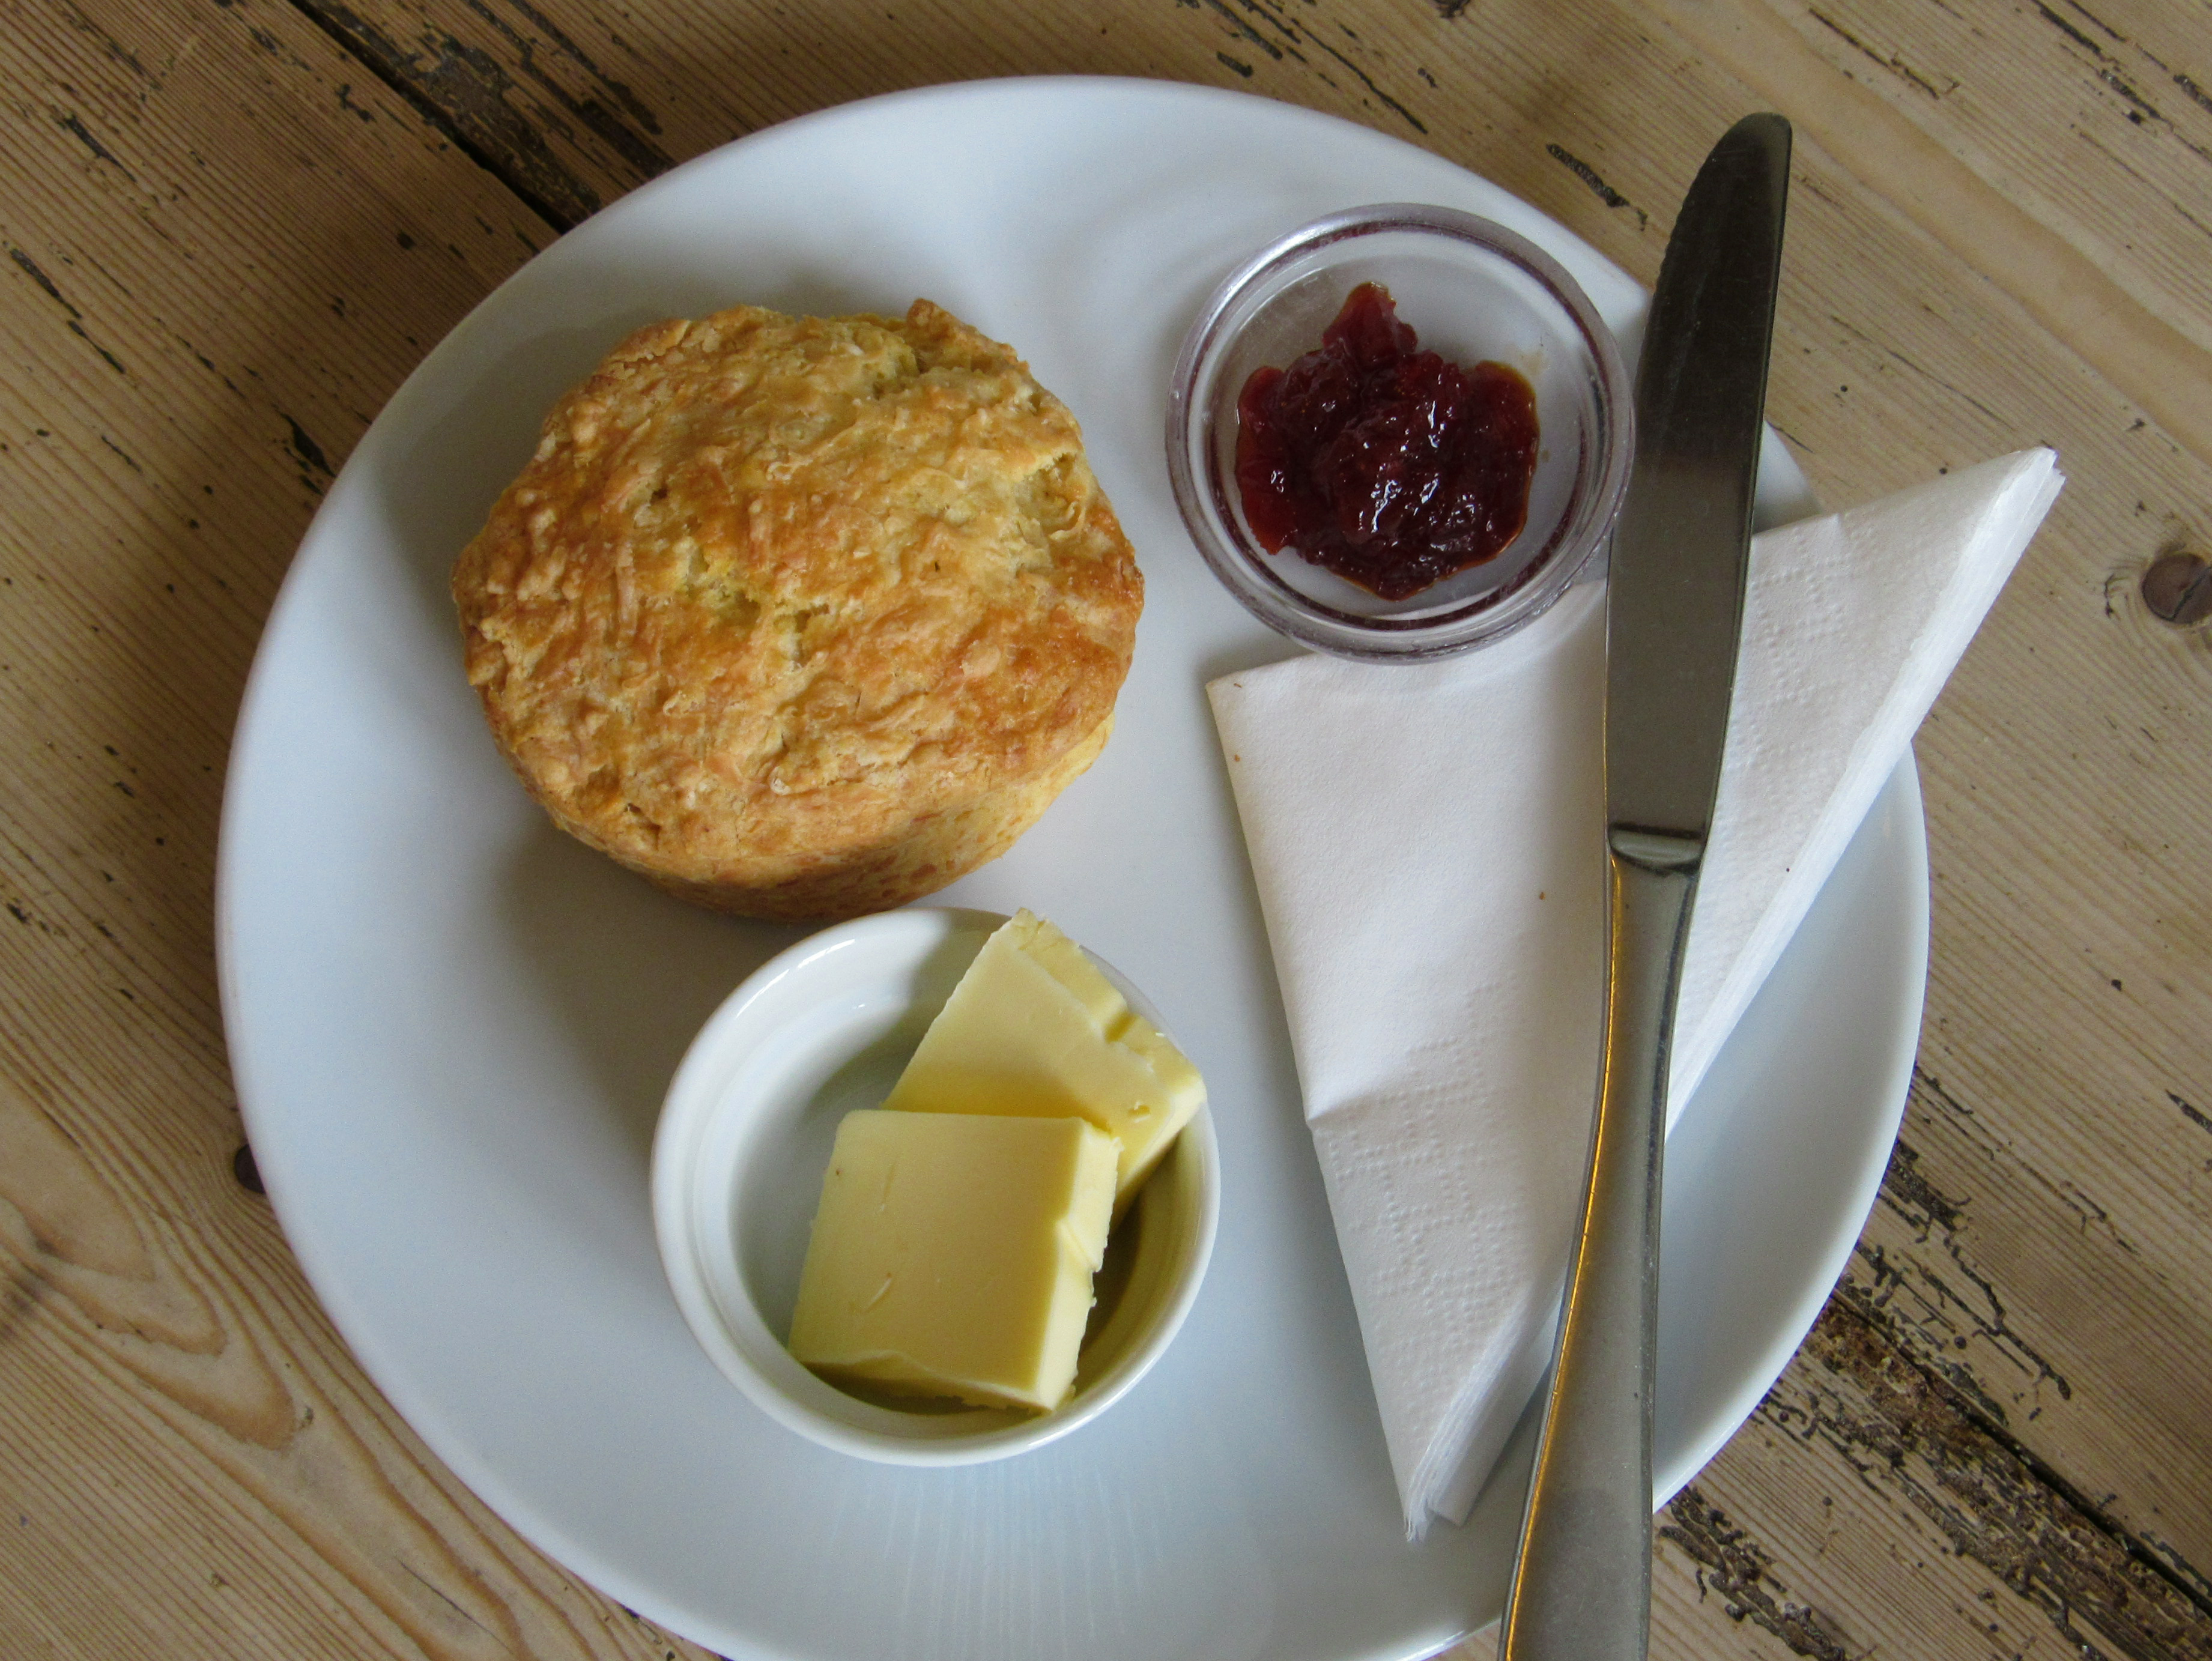 Cafe 46 Wickham Market - Our famous cheese scones